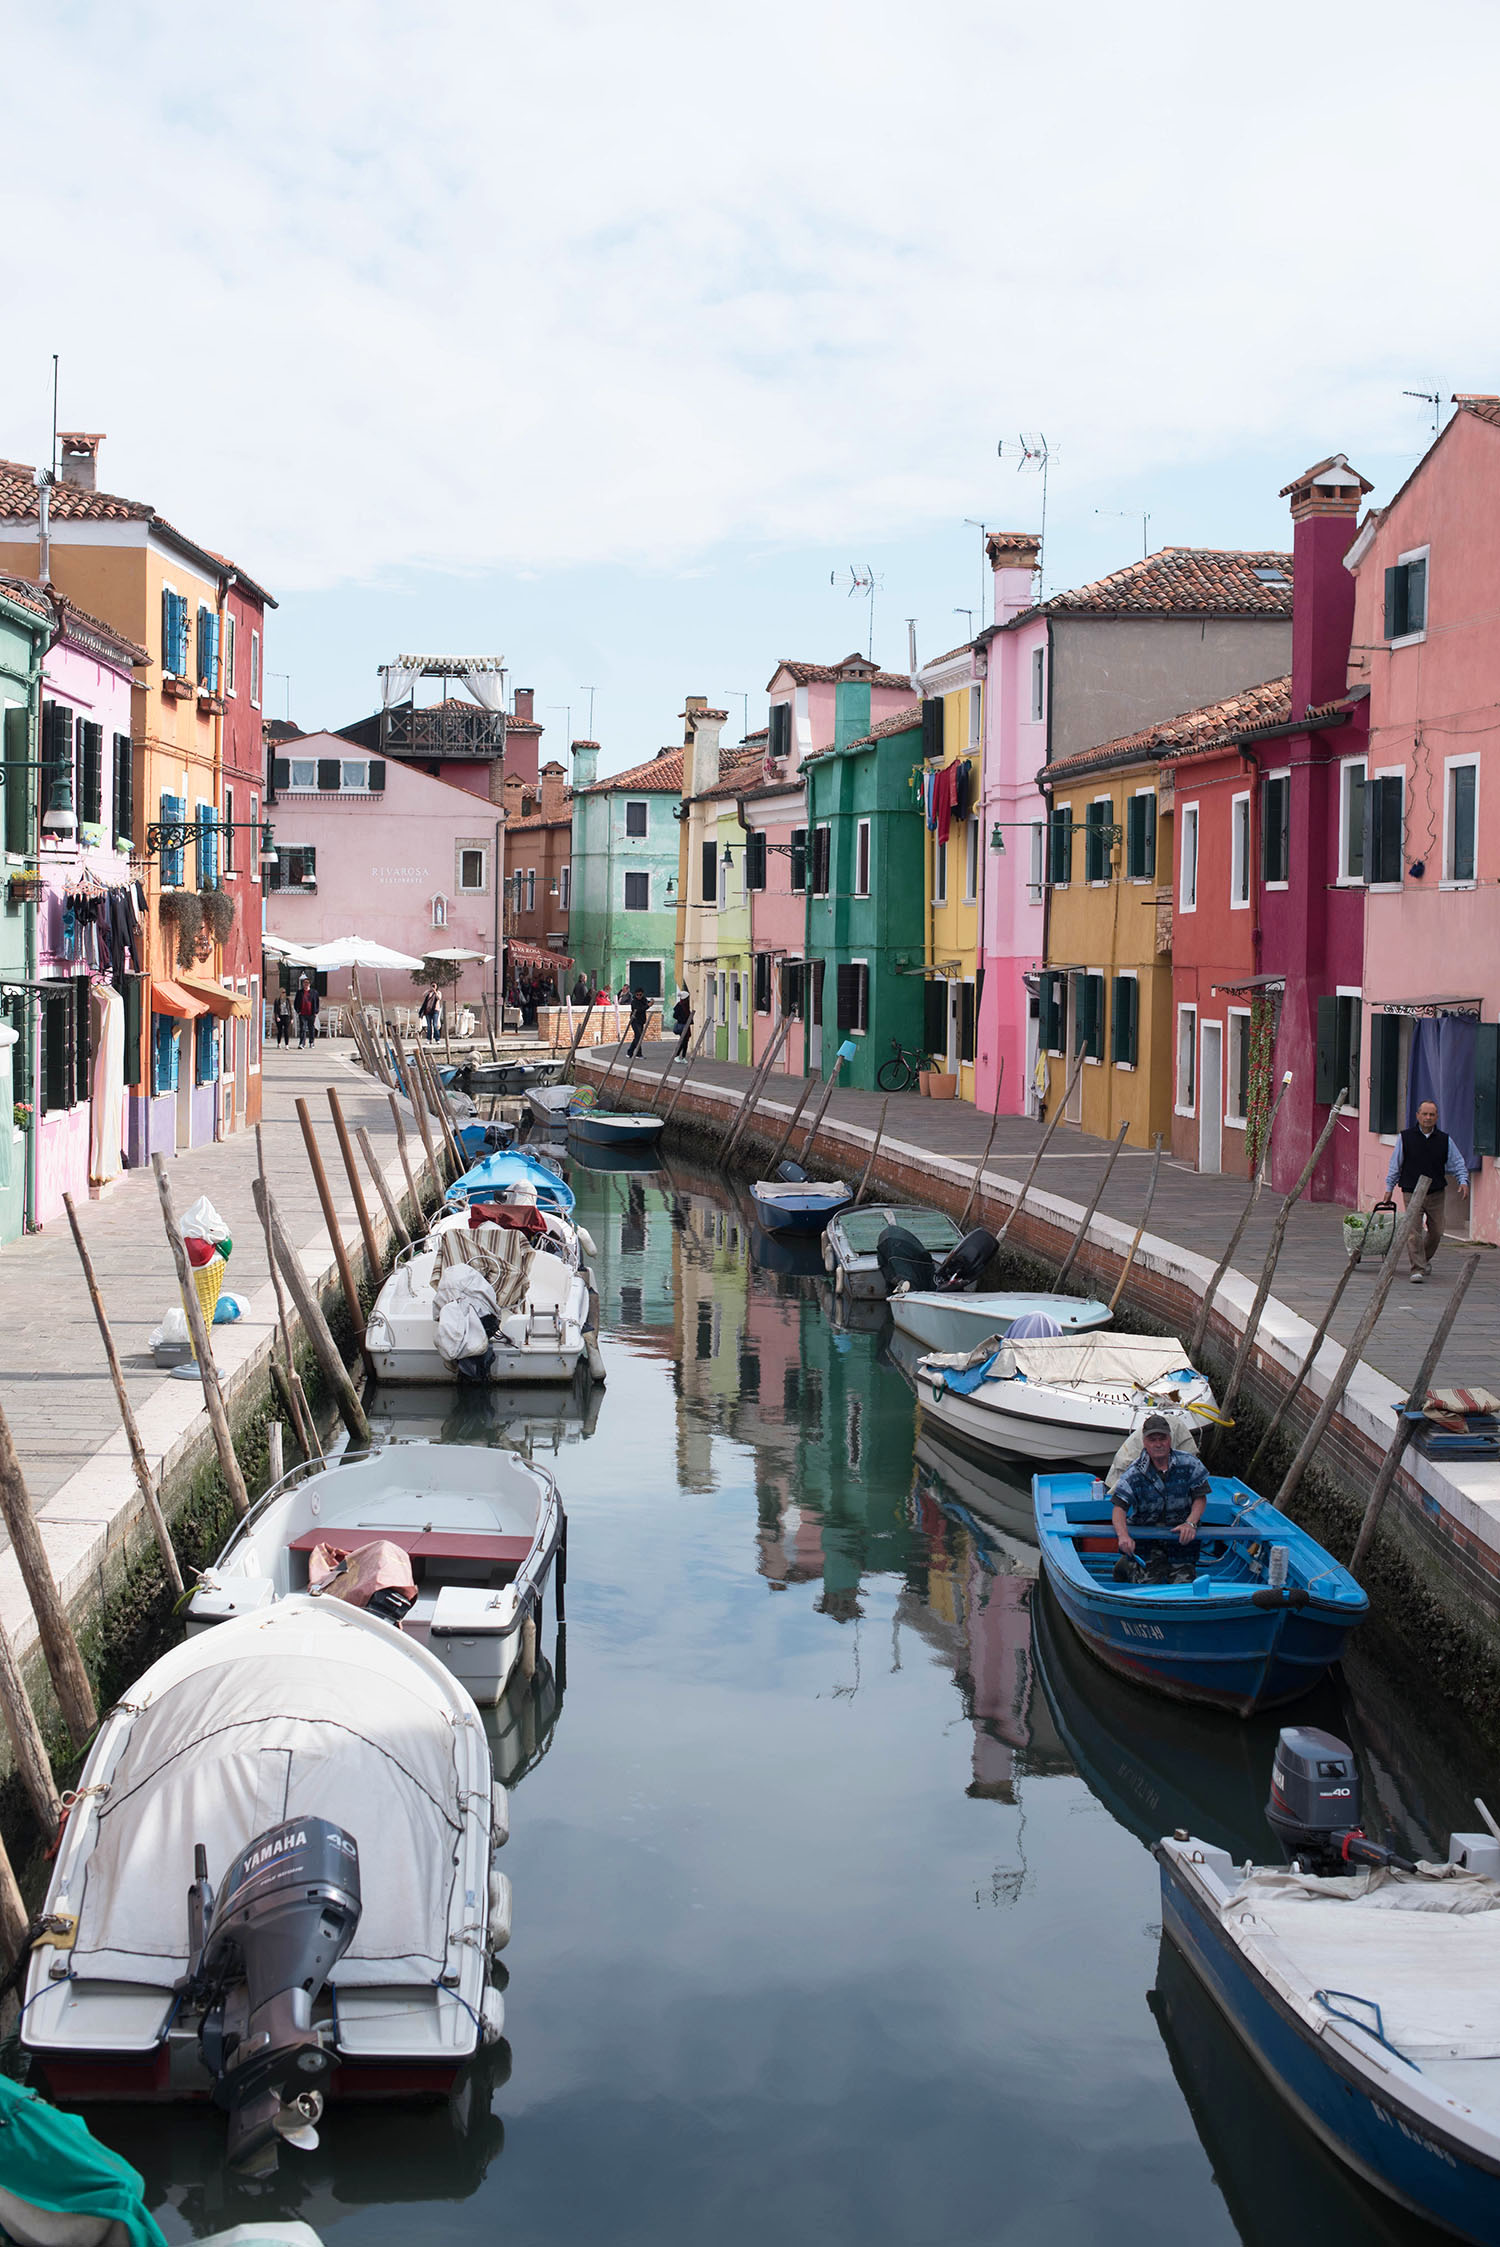 Colourful houses on either side of the canal in Burano, Italy, captured by travel blogger Cee Fardoe of Coco & vera